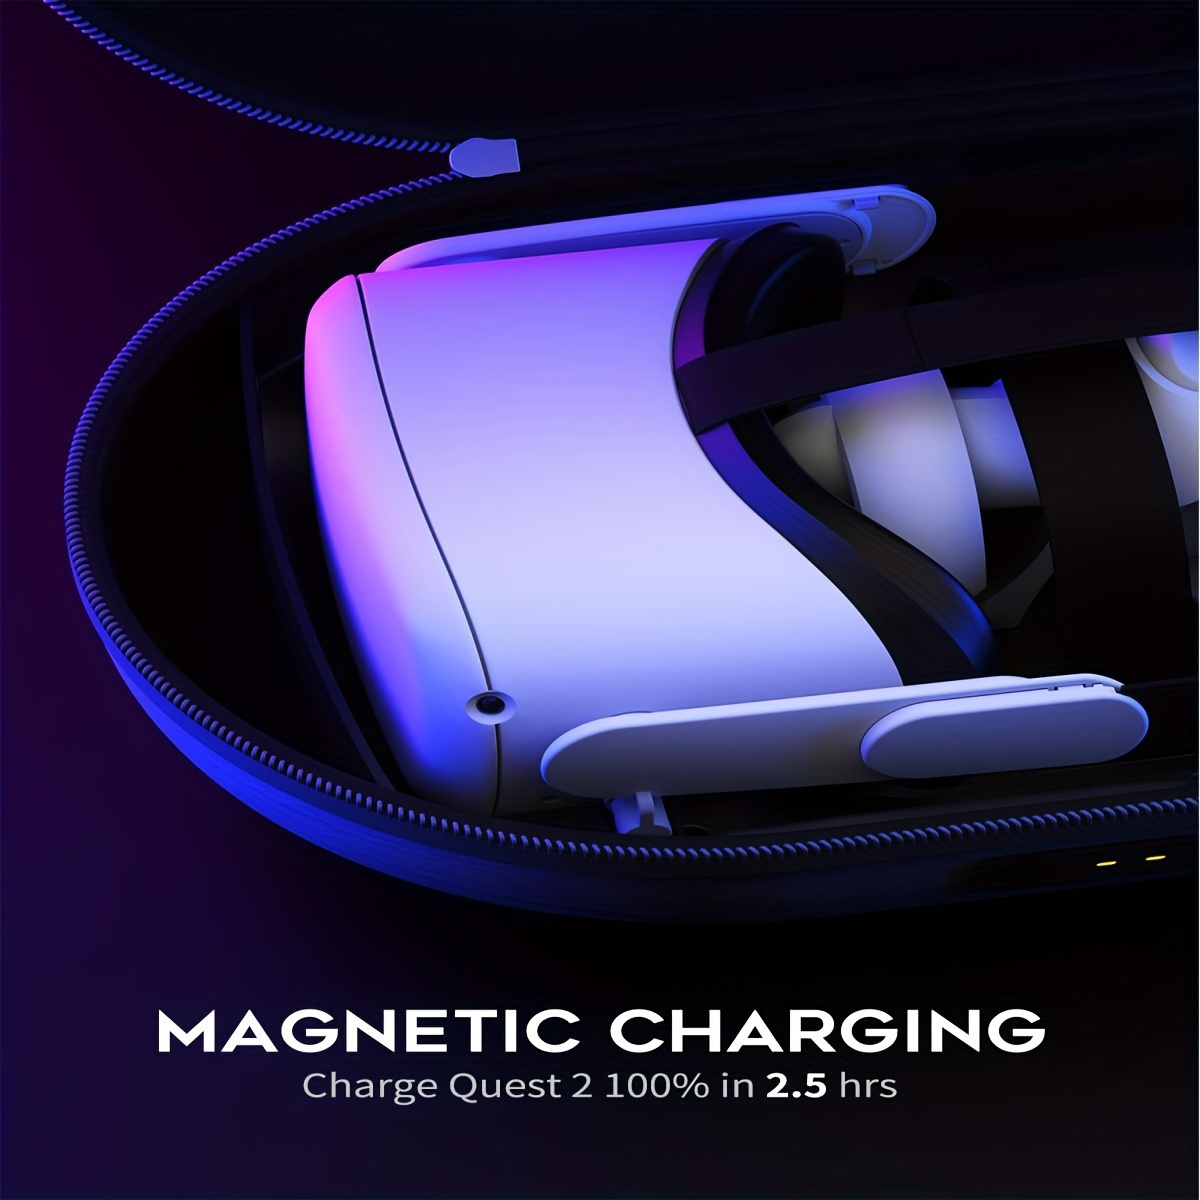 * OC1 Charging Carrying Case for Quest 2 Accessories, 3 in 1 Magnetic  Charging Station for VR Host, Battery Head Strap and Storage, 2.5 Hours Fas